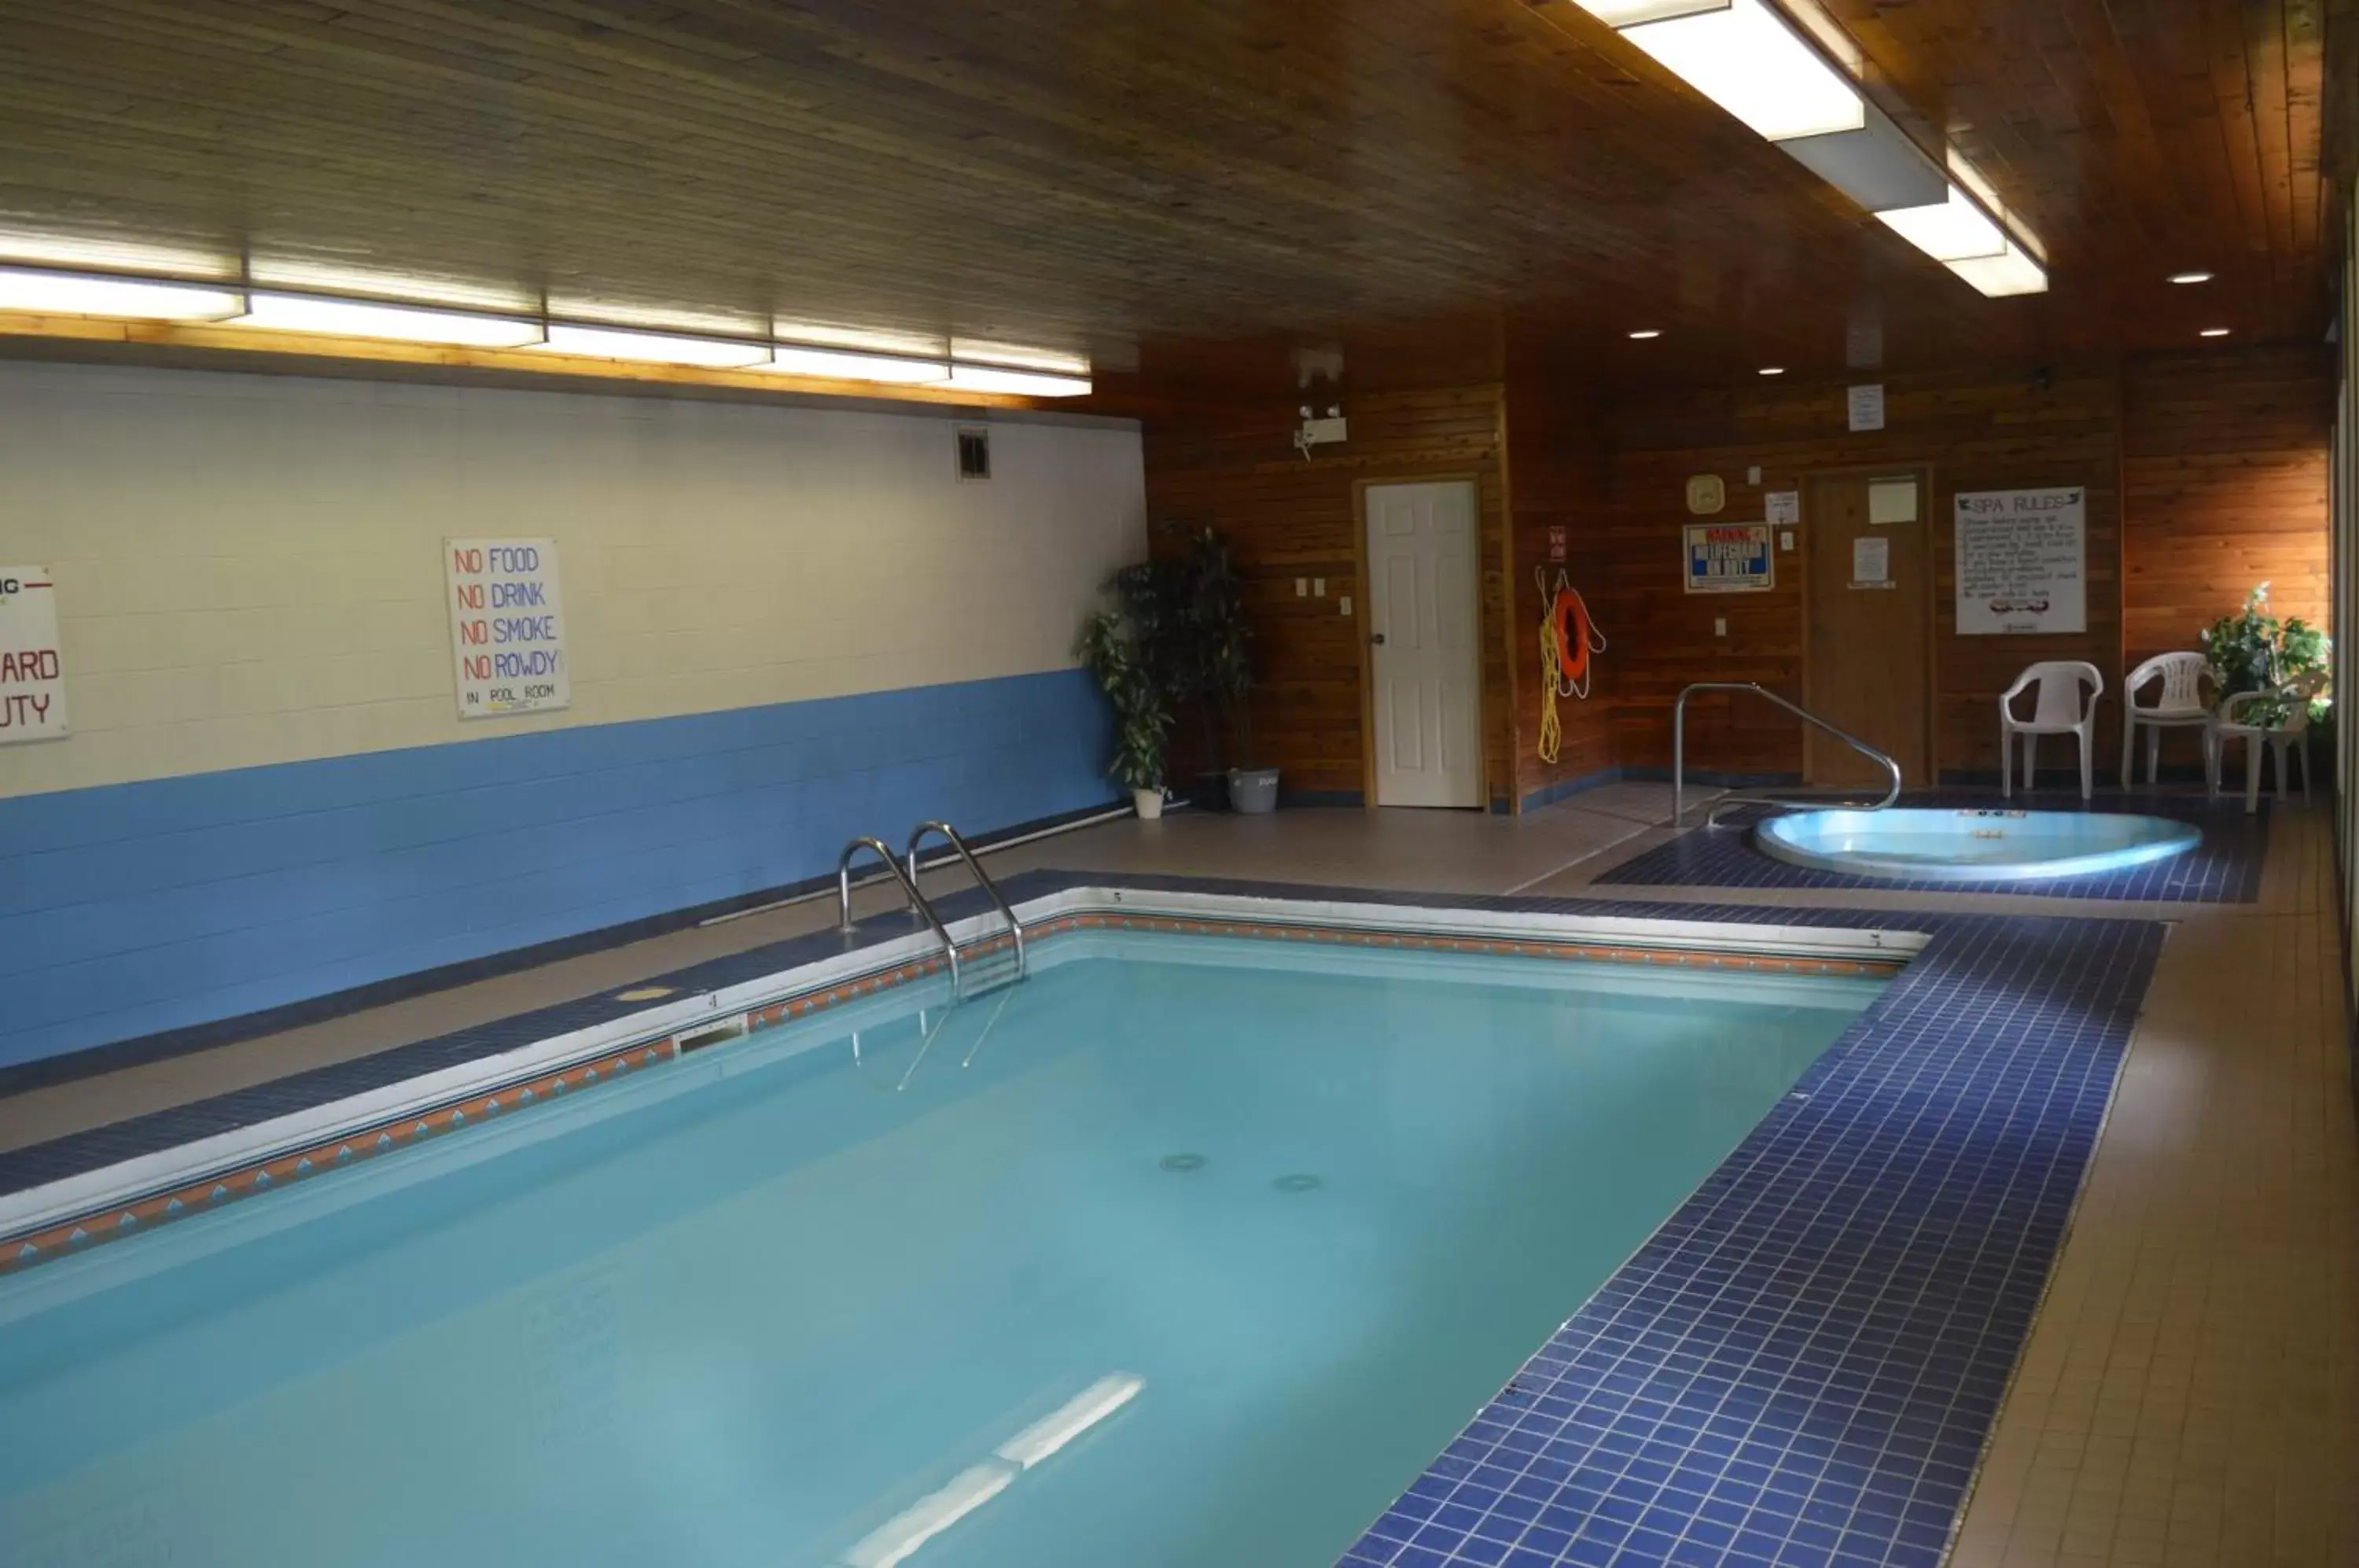 Swimming Pool in Mary's Motel